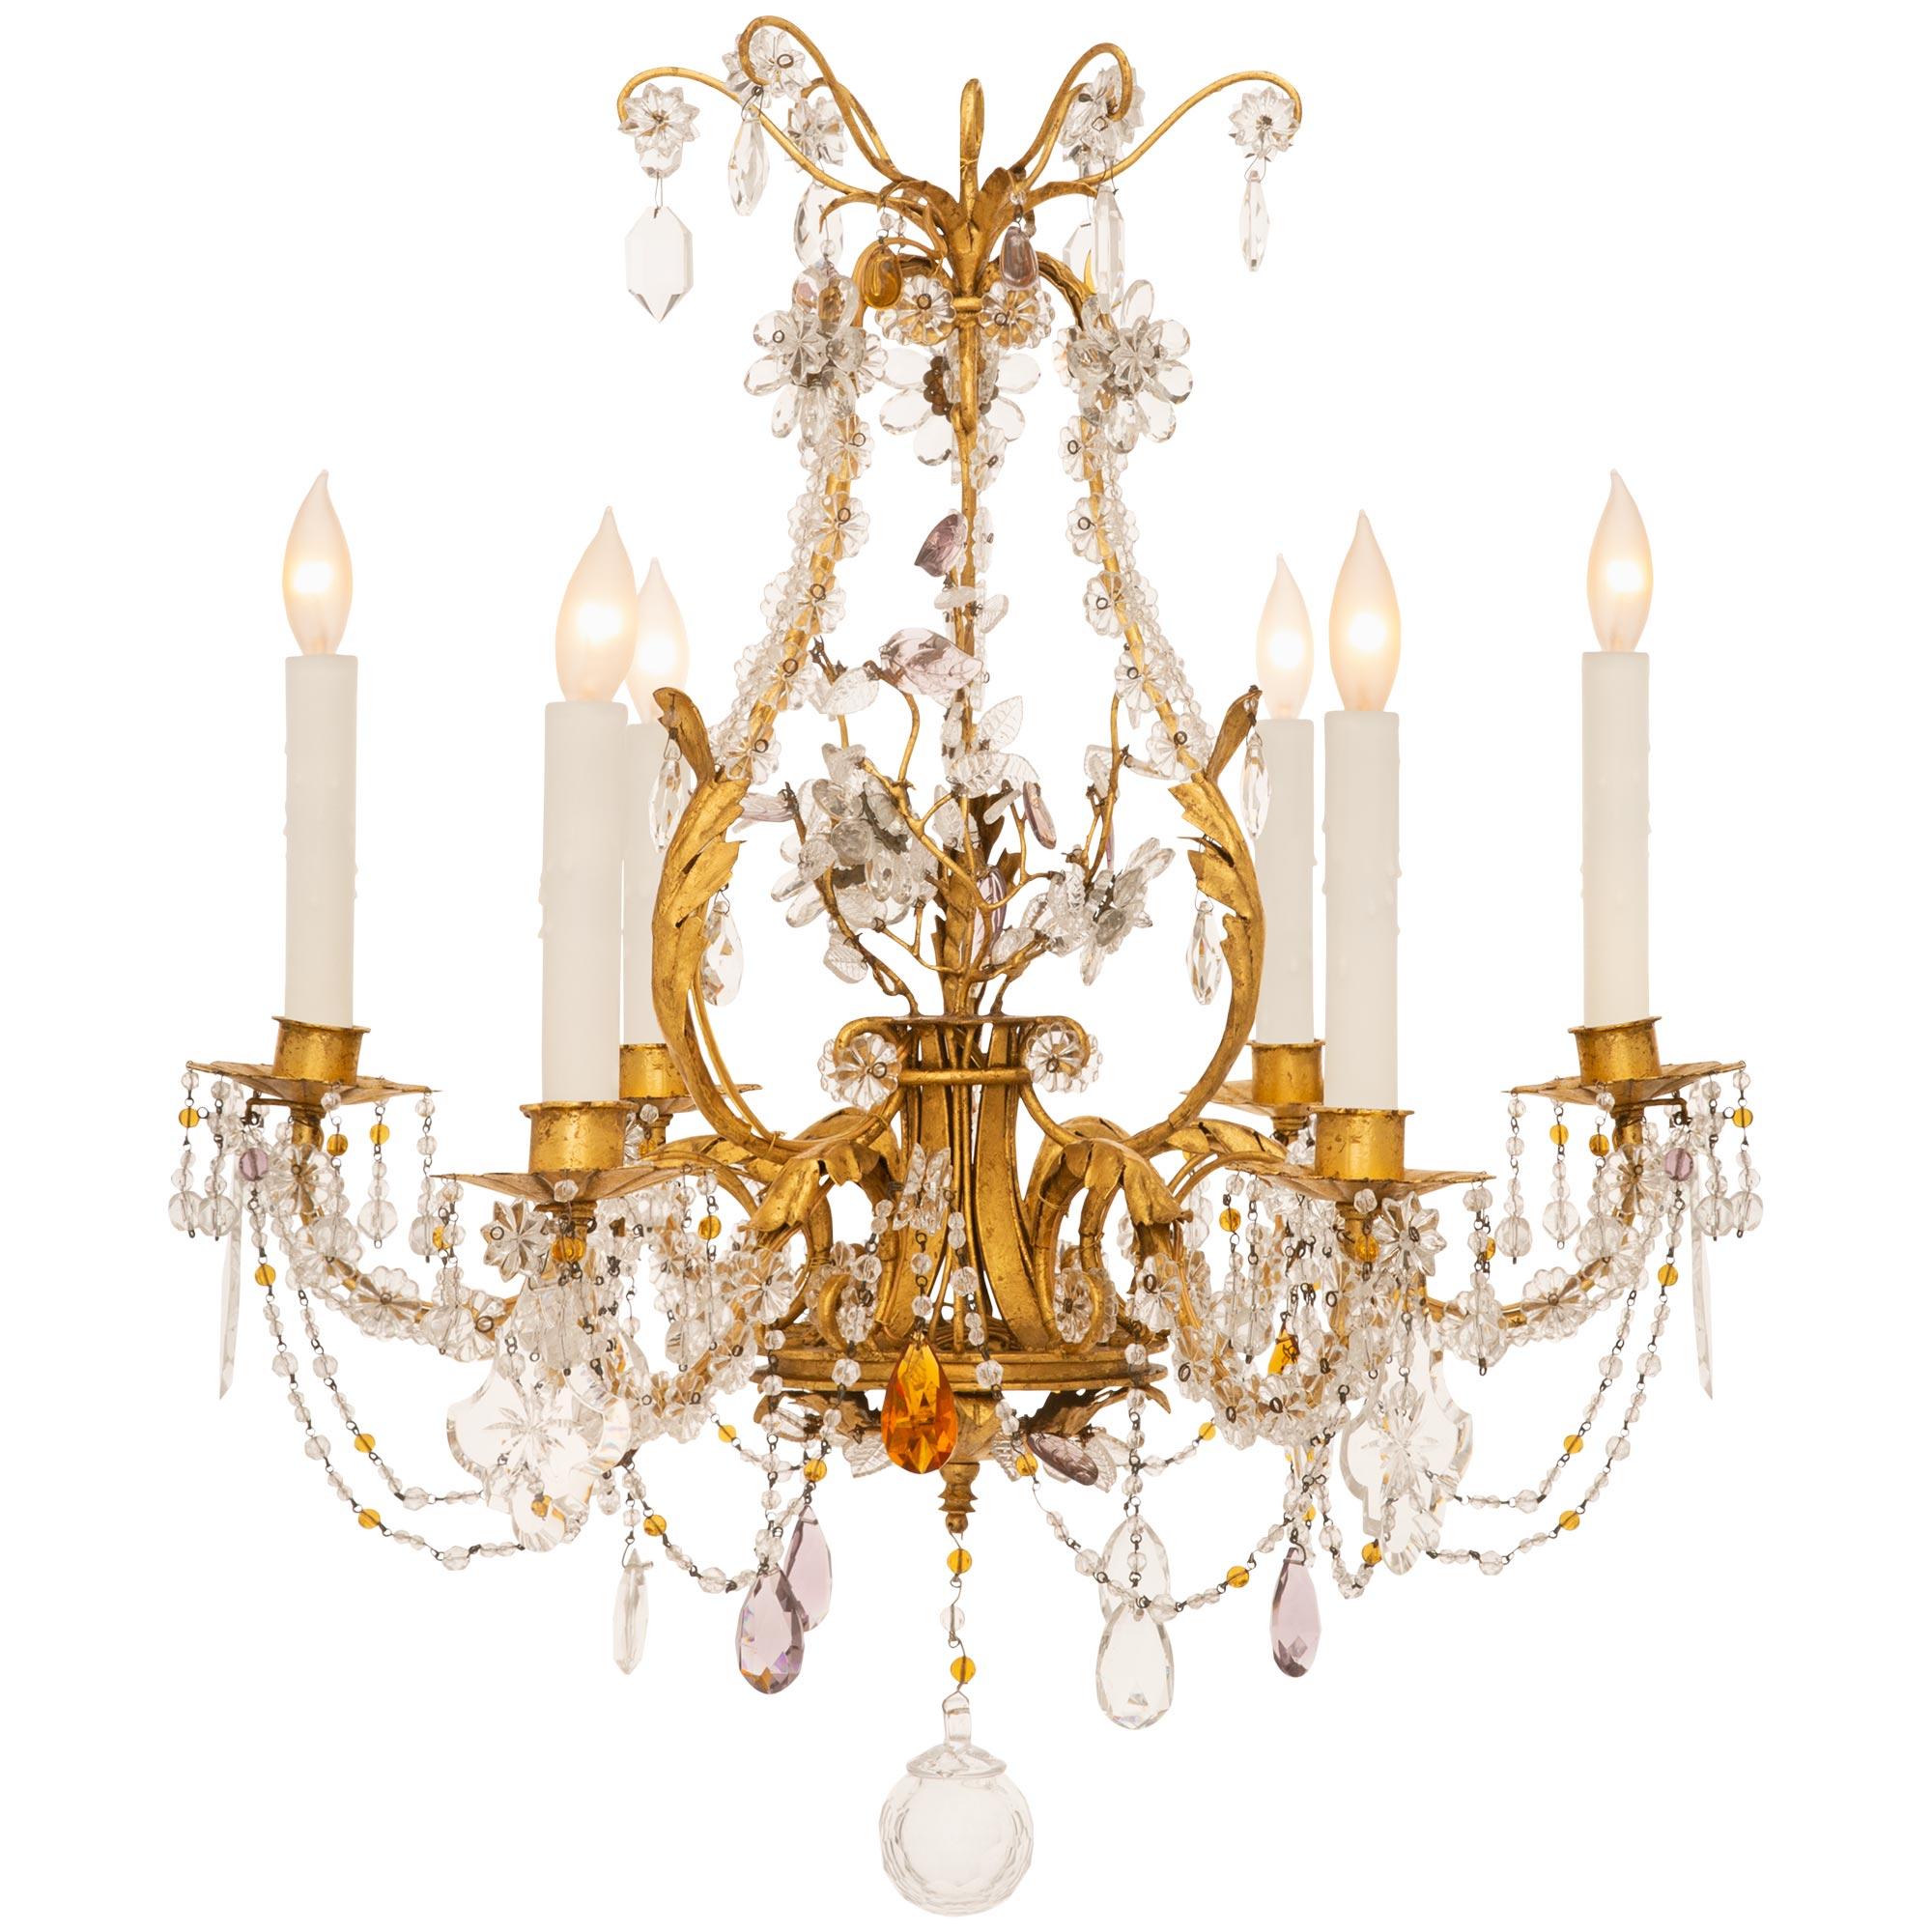 French Turn Of The Century Louis XV St. Gilt Metal & Baccarat Crystal Chandelier In Good Condition For Sale In West Palm Beach, FL